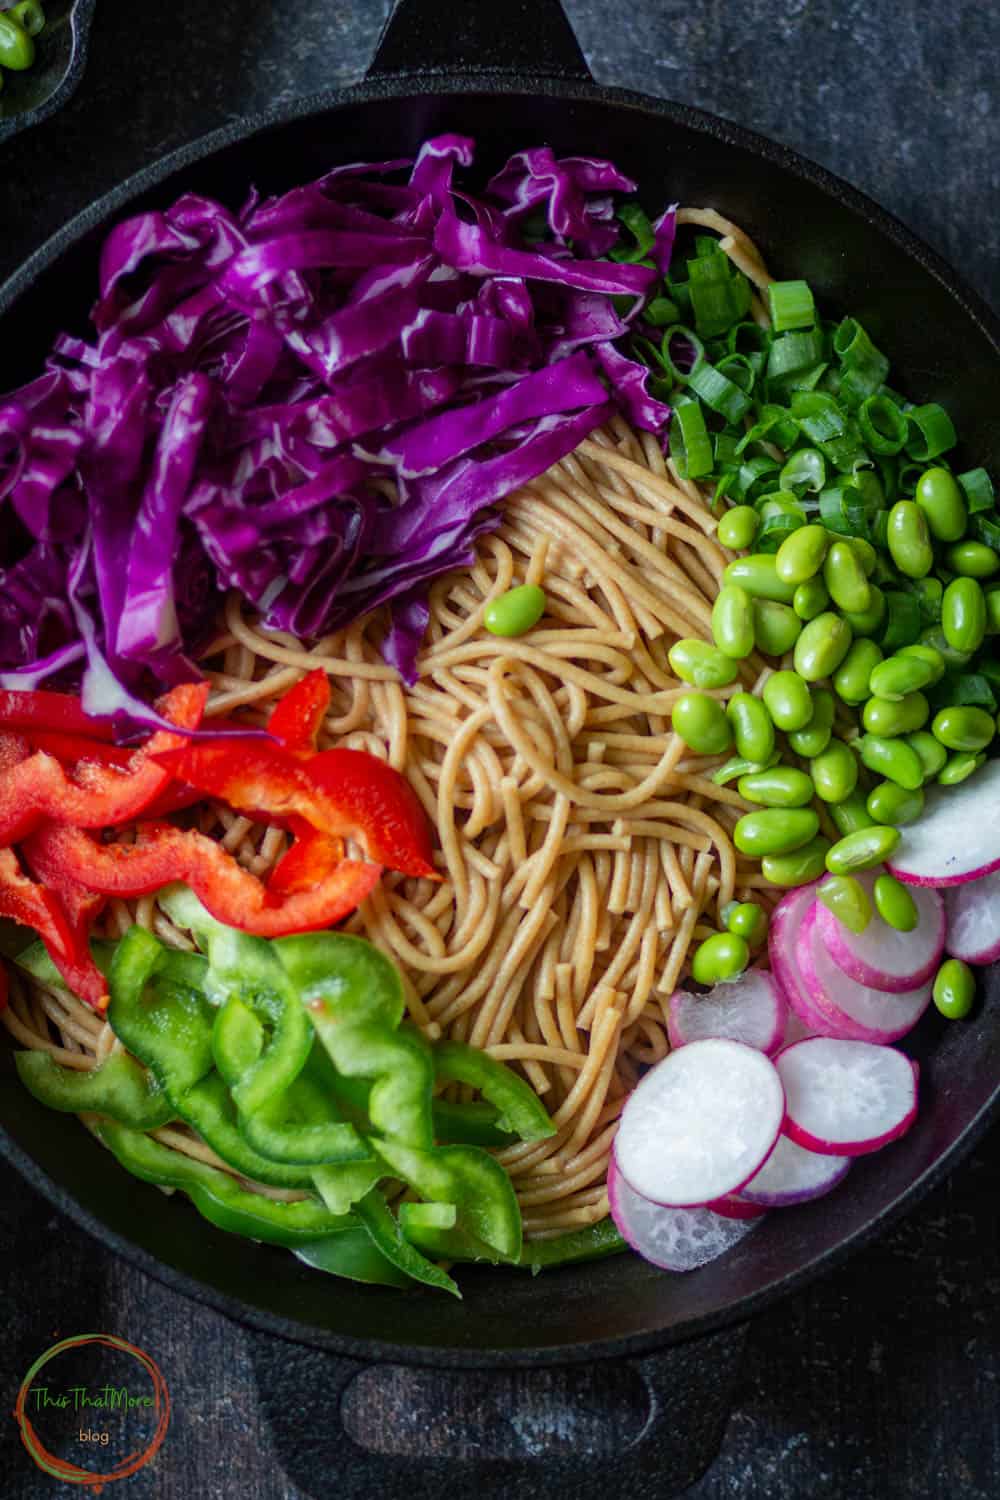 Add all the noodle salad ingredients in a salad bowl. 